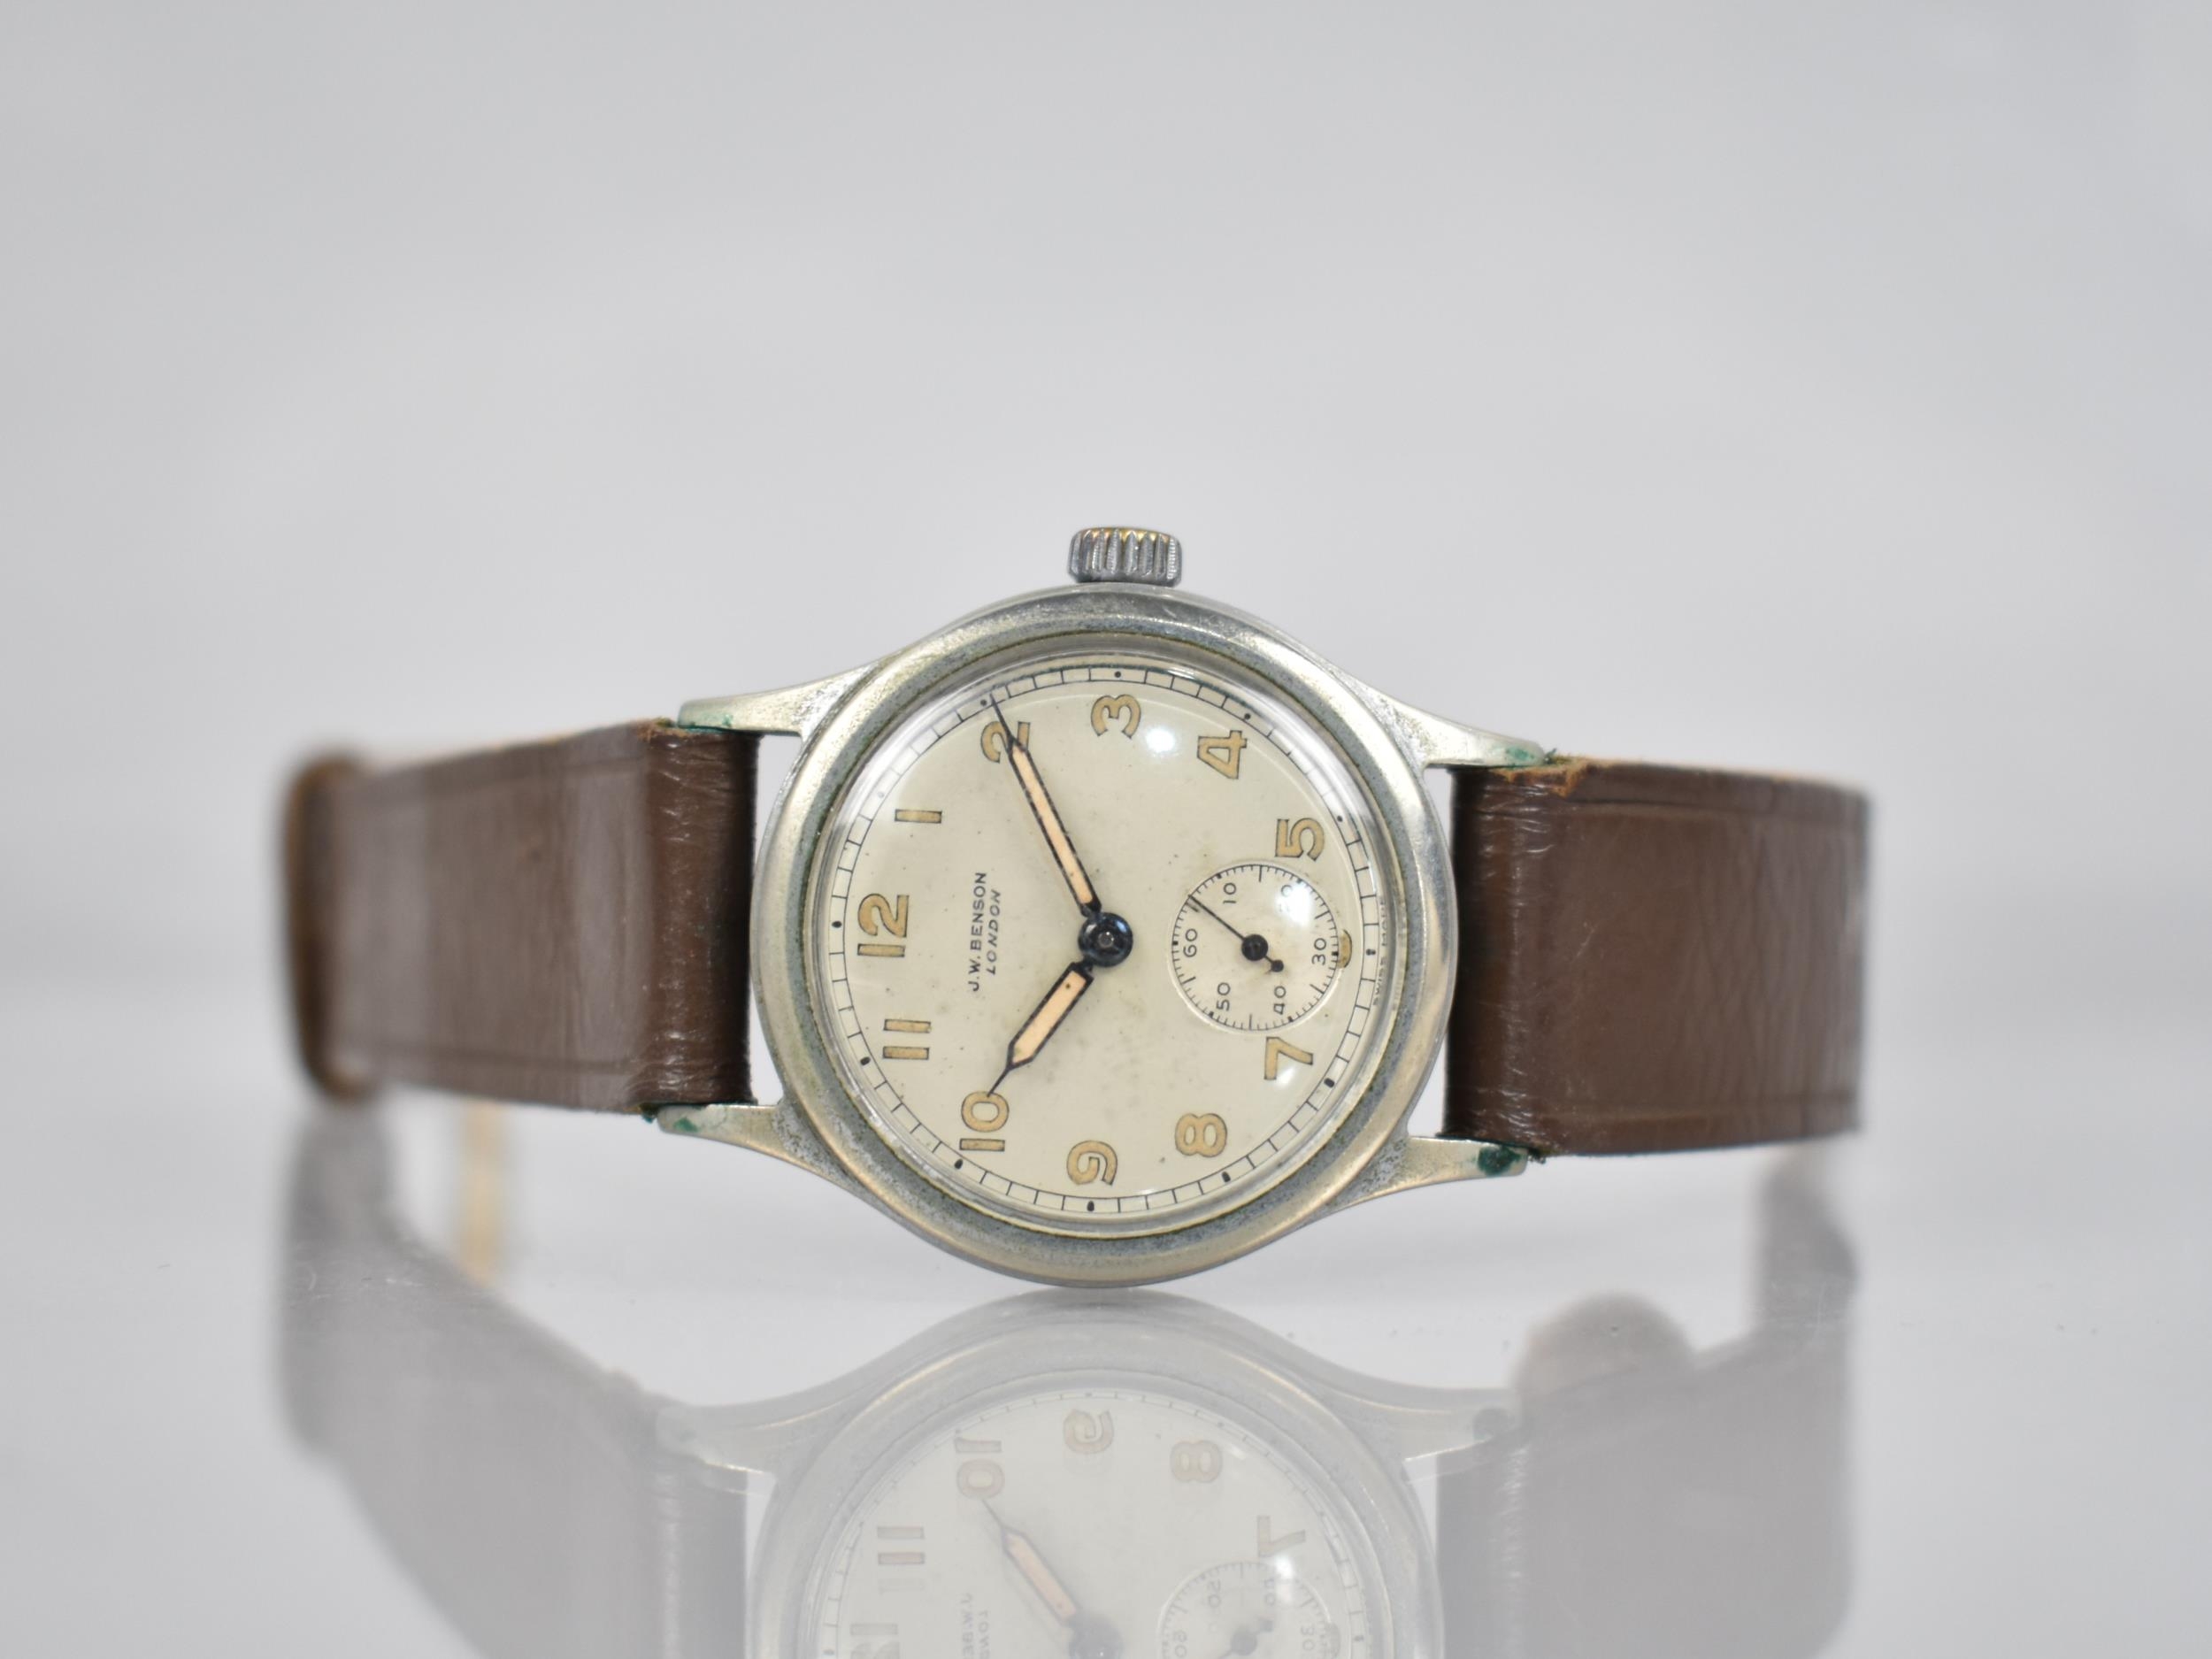 A JW Benson Vintage Wrist Watch, Silvered Dial with Arabic Numerals, Subsidiary Seconds Hands